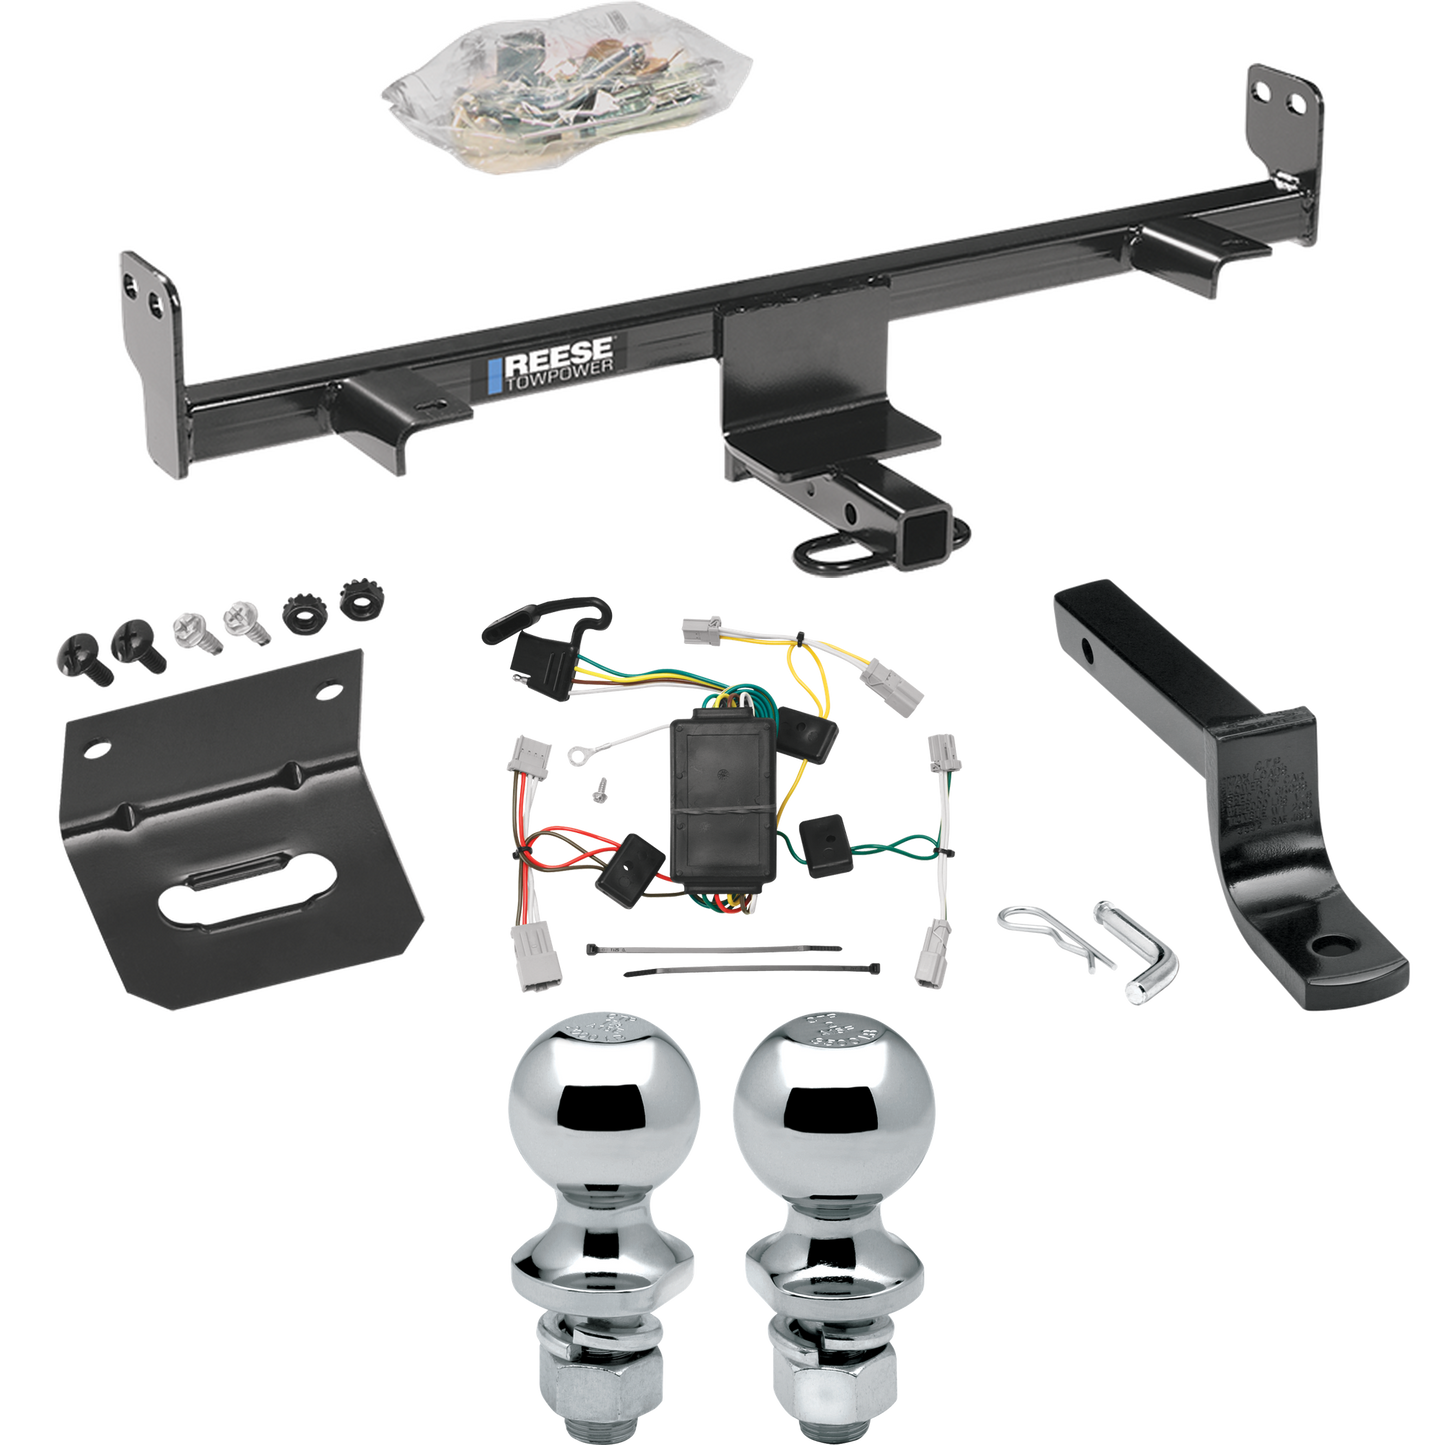 Fits 2004-2009 Mazda 3 Trailer Hitch Tow PKG w/ 4-Flat Wiring Harness + Draw-Bar + 1-7/8" + 2" Ball + Wiring Bracket (For Sedan, Except w/Grand Touring LED Taillights Models) By Reese Towpower